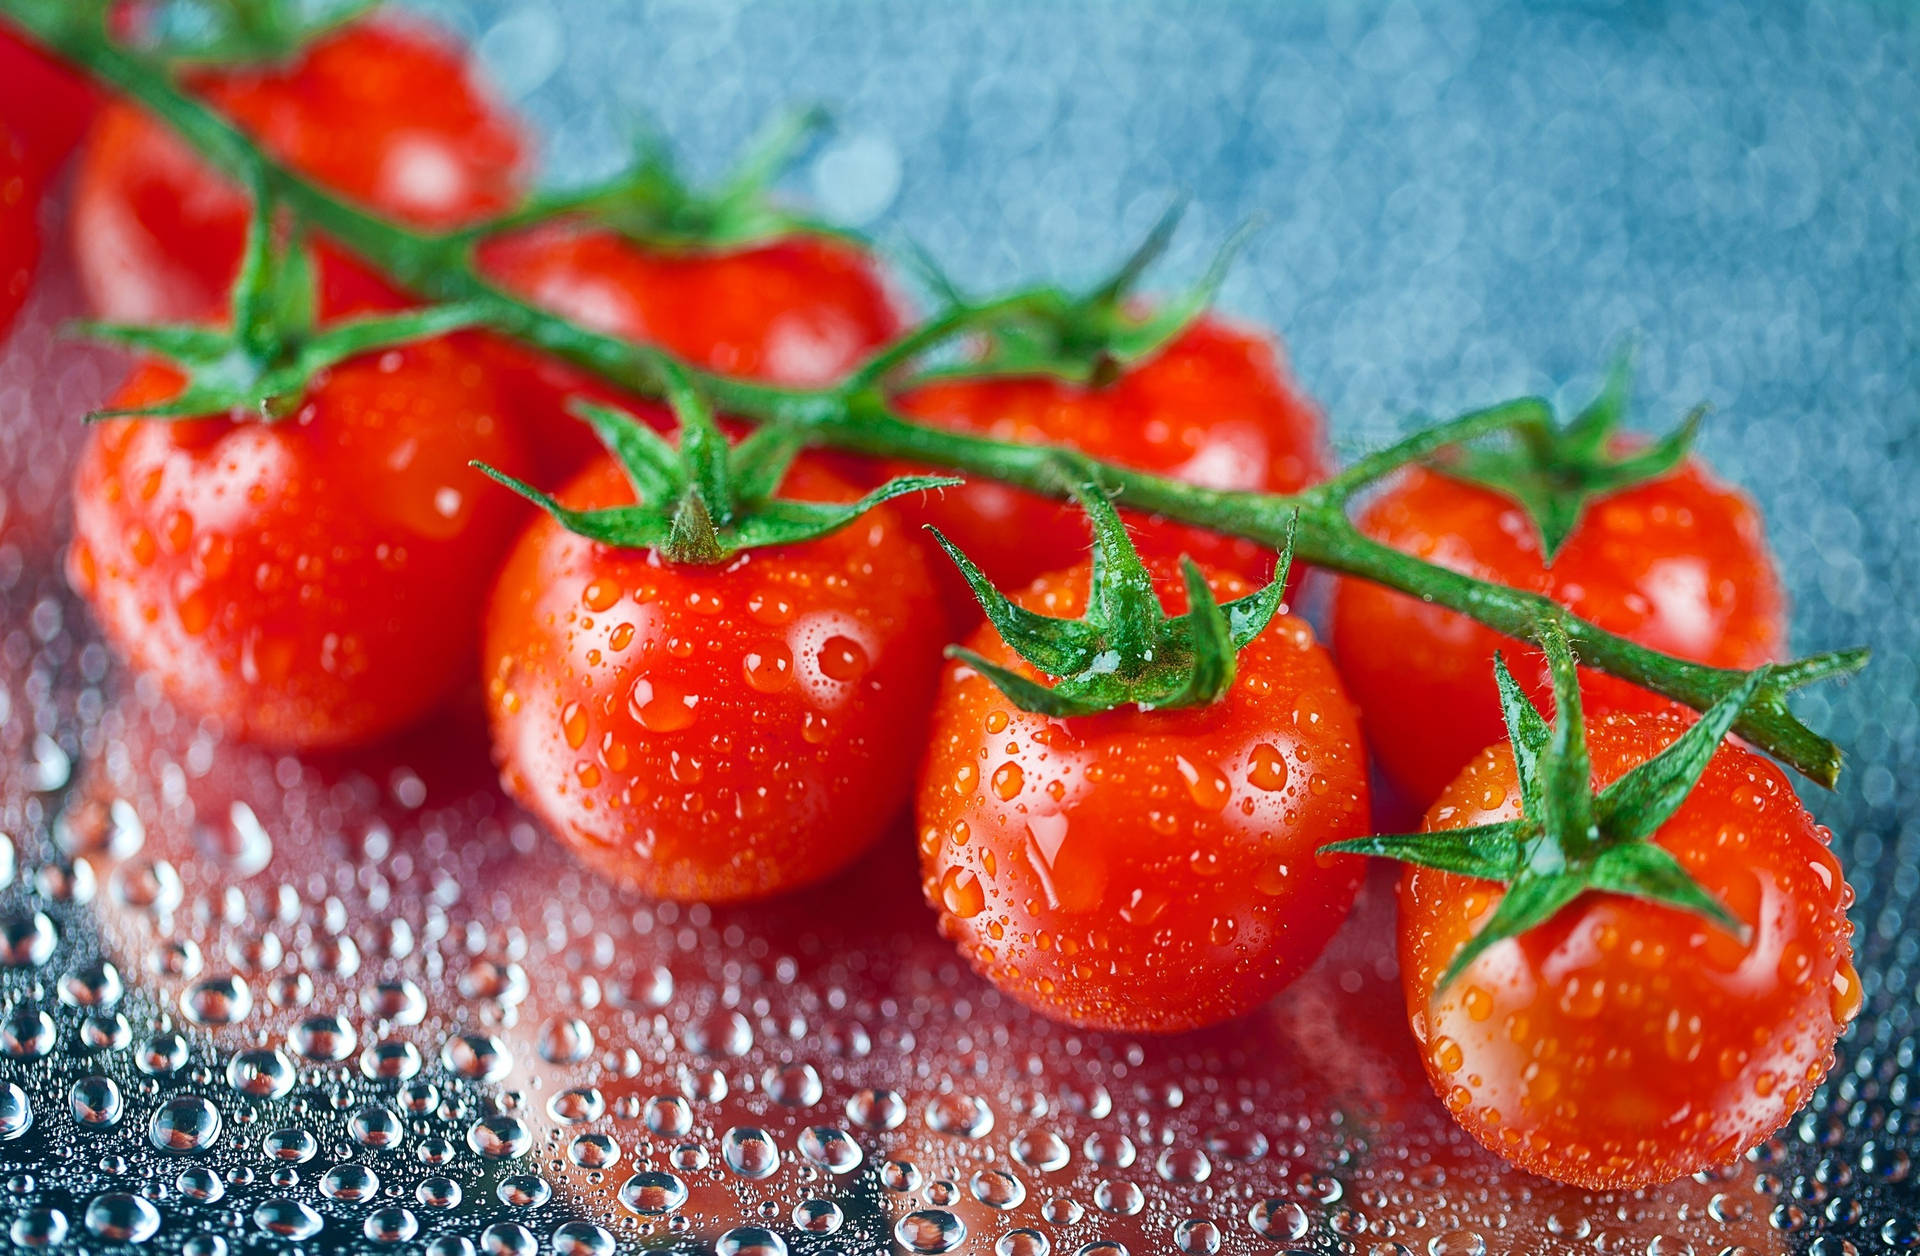 Clustered Red Cherry Tomato Fruits Wallpaper